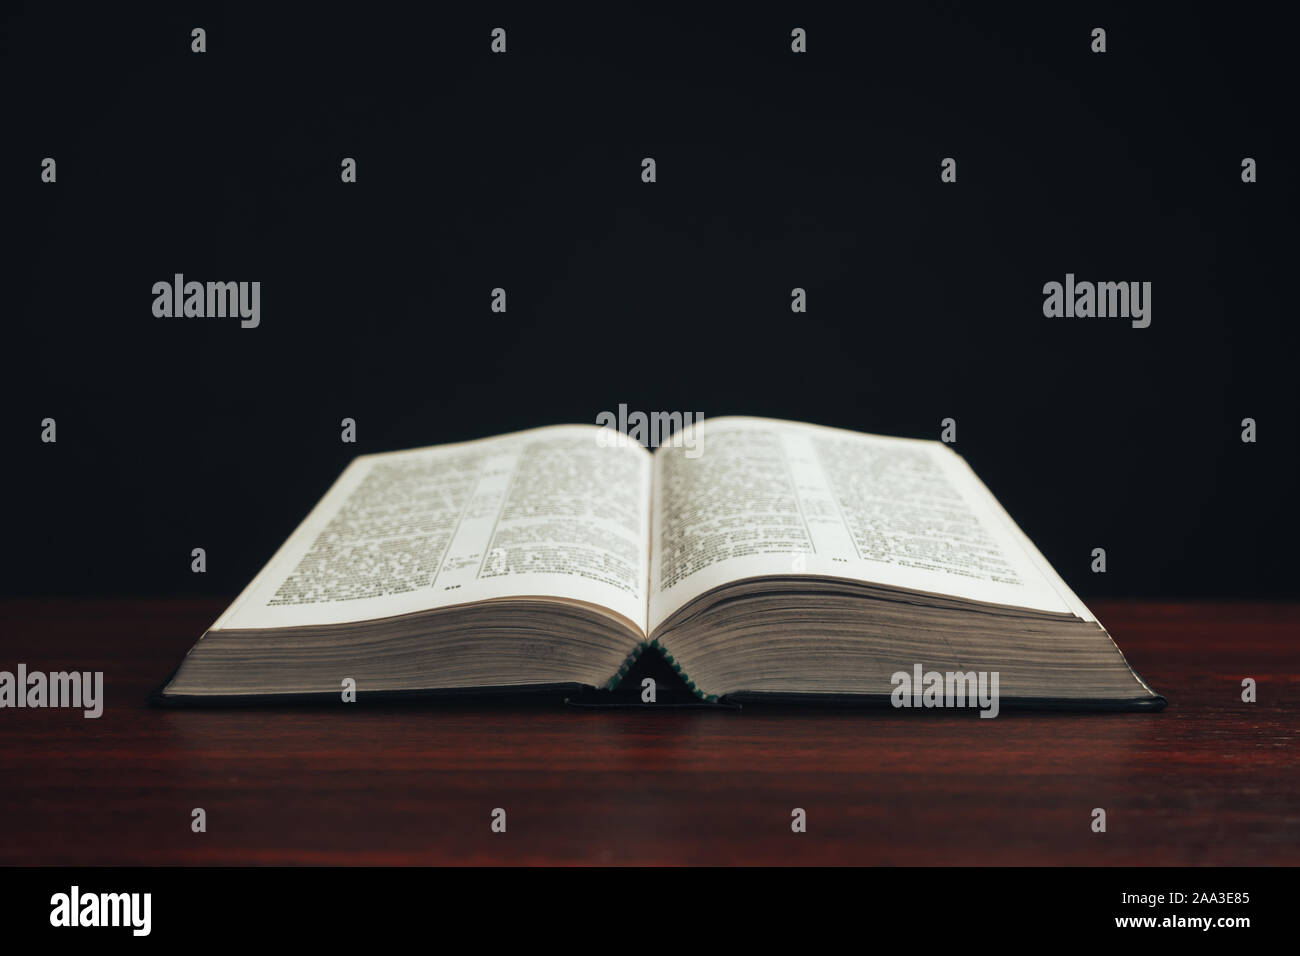 Open bible on a  red wooden table. Beautiful black background. Stock Photo